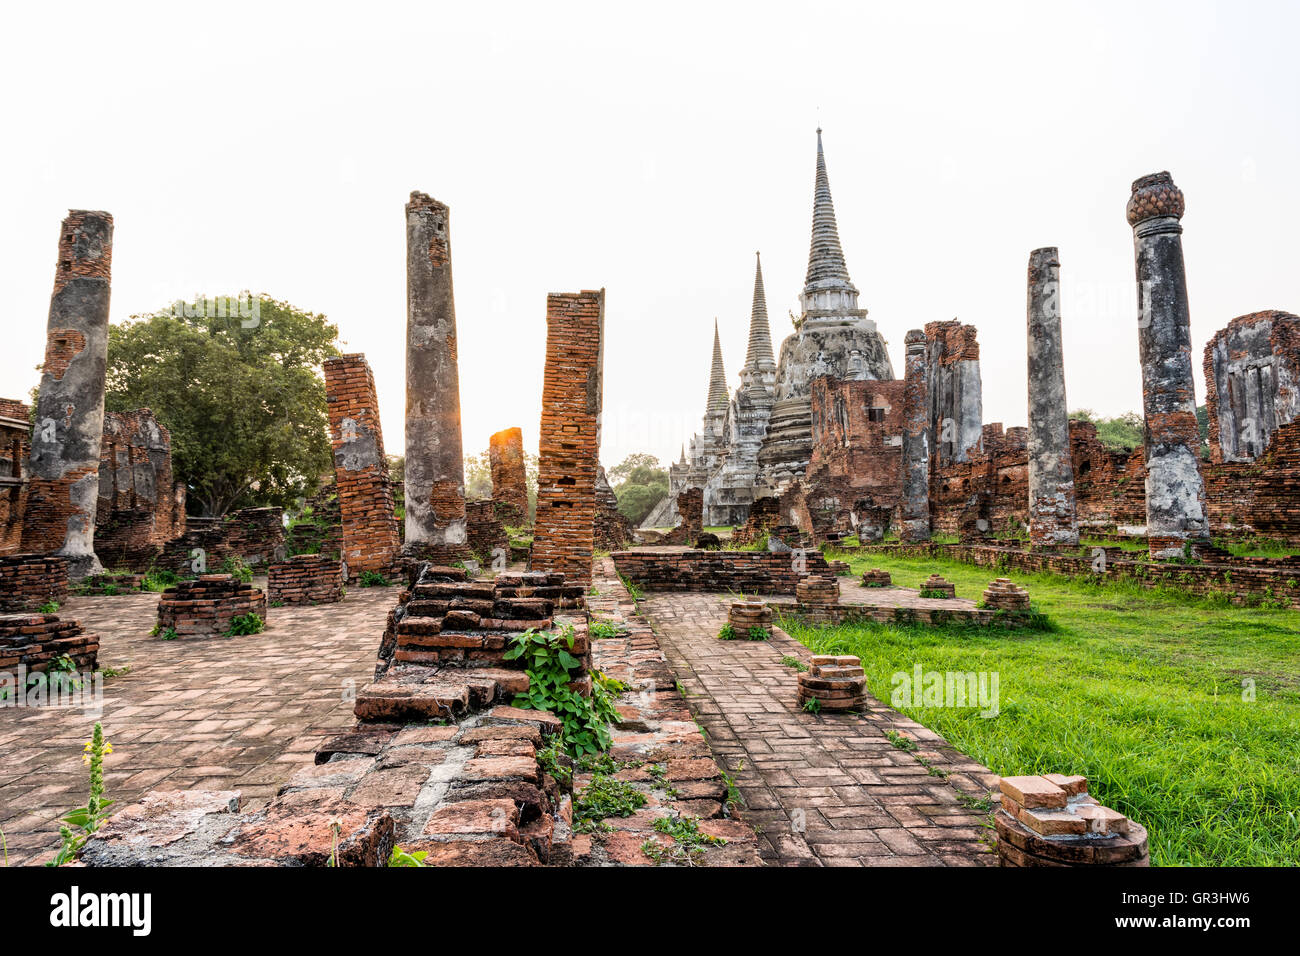 Ruins and pagoda ancient architecture of Wat Phra Si Sanphet old temple famous attractions during sunset at Ayutthaya Thailand Stock Photo